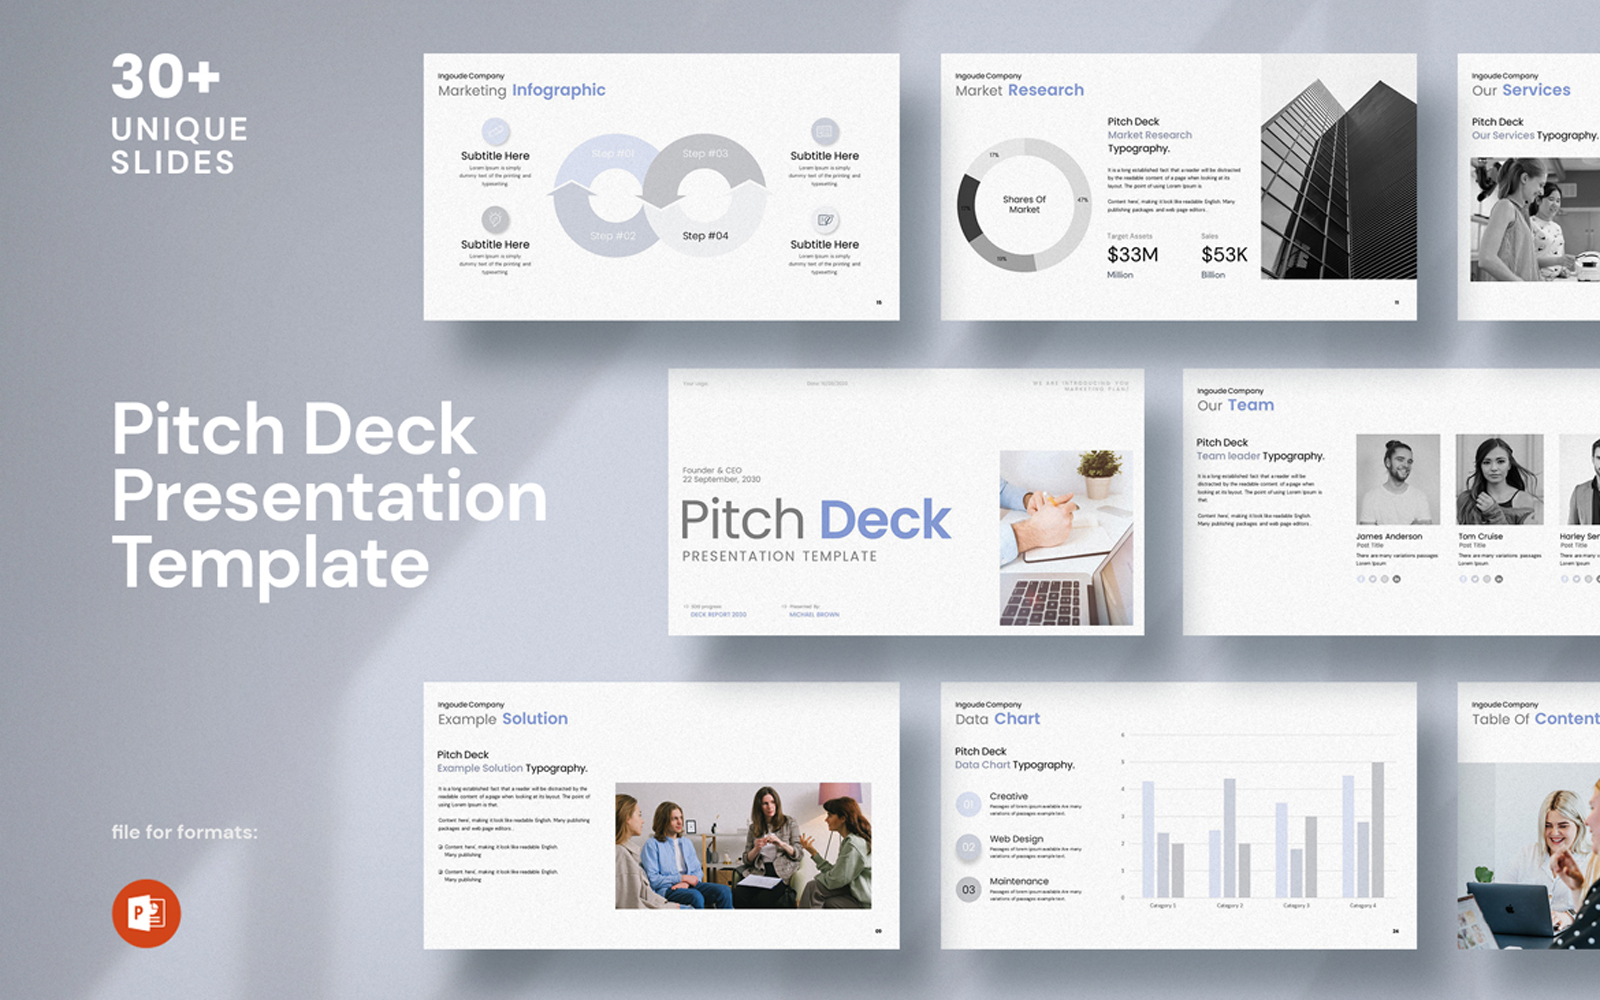 Pitch Deck PowrePoint Template